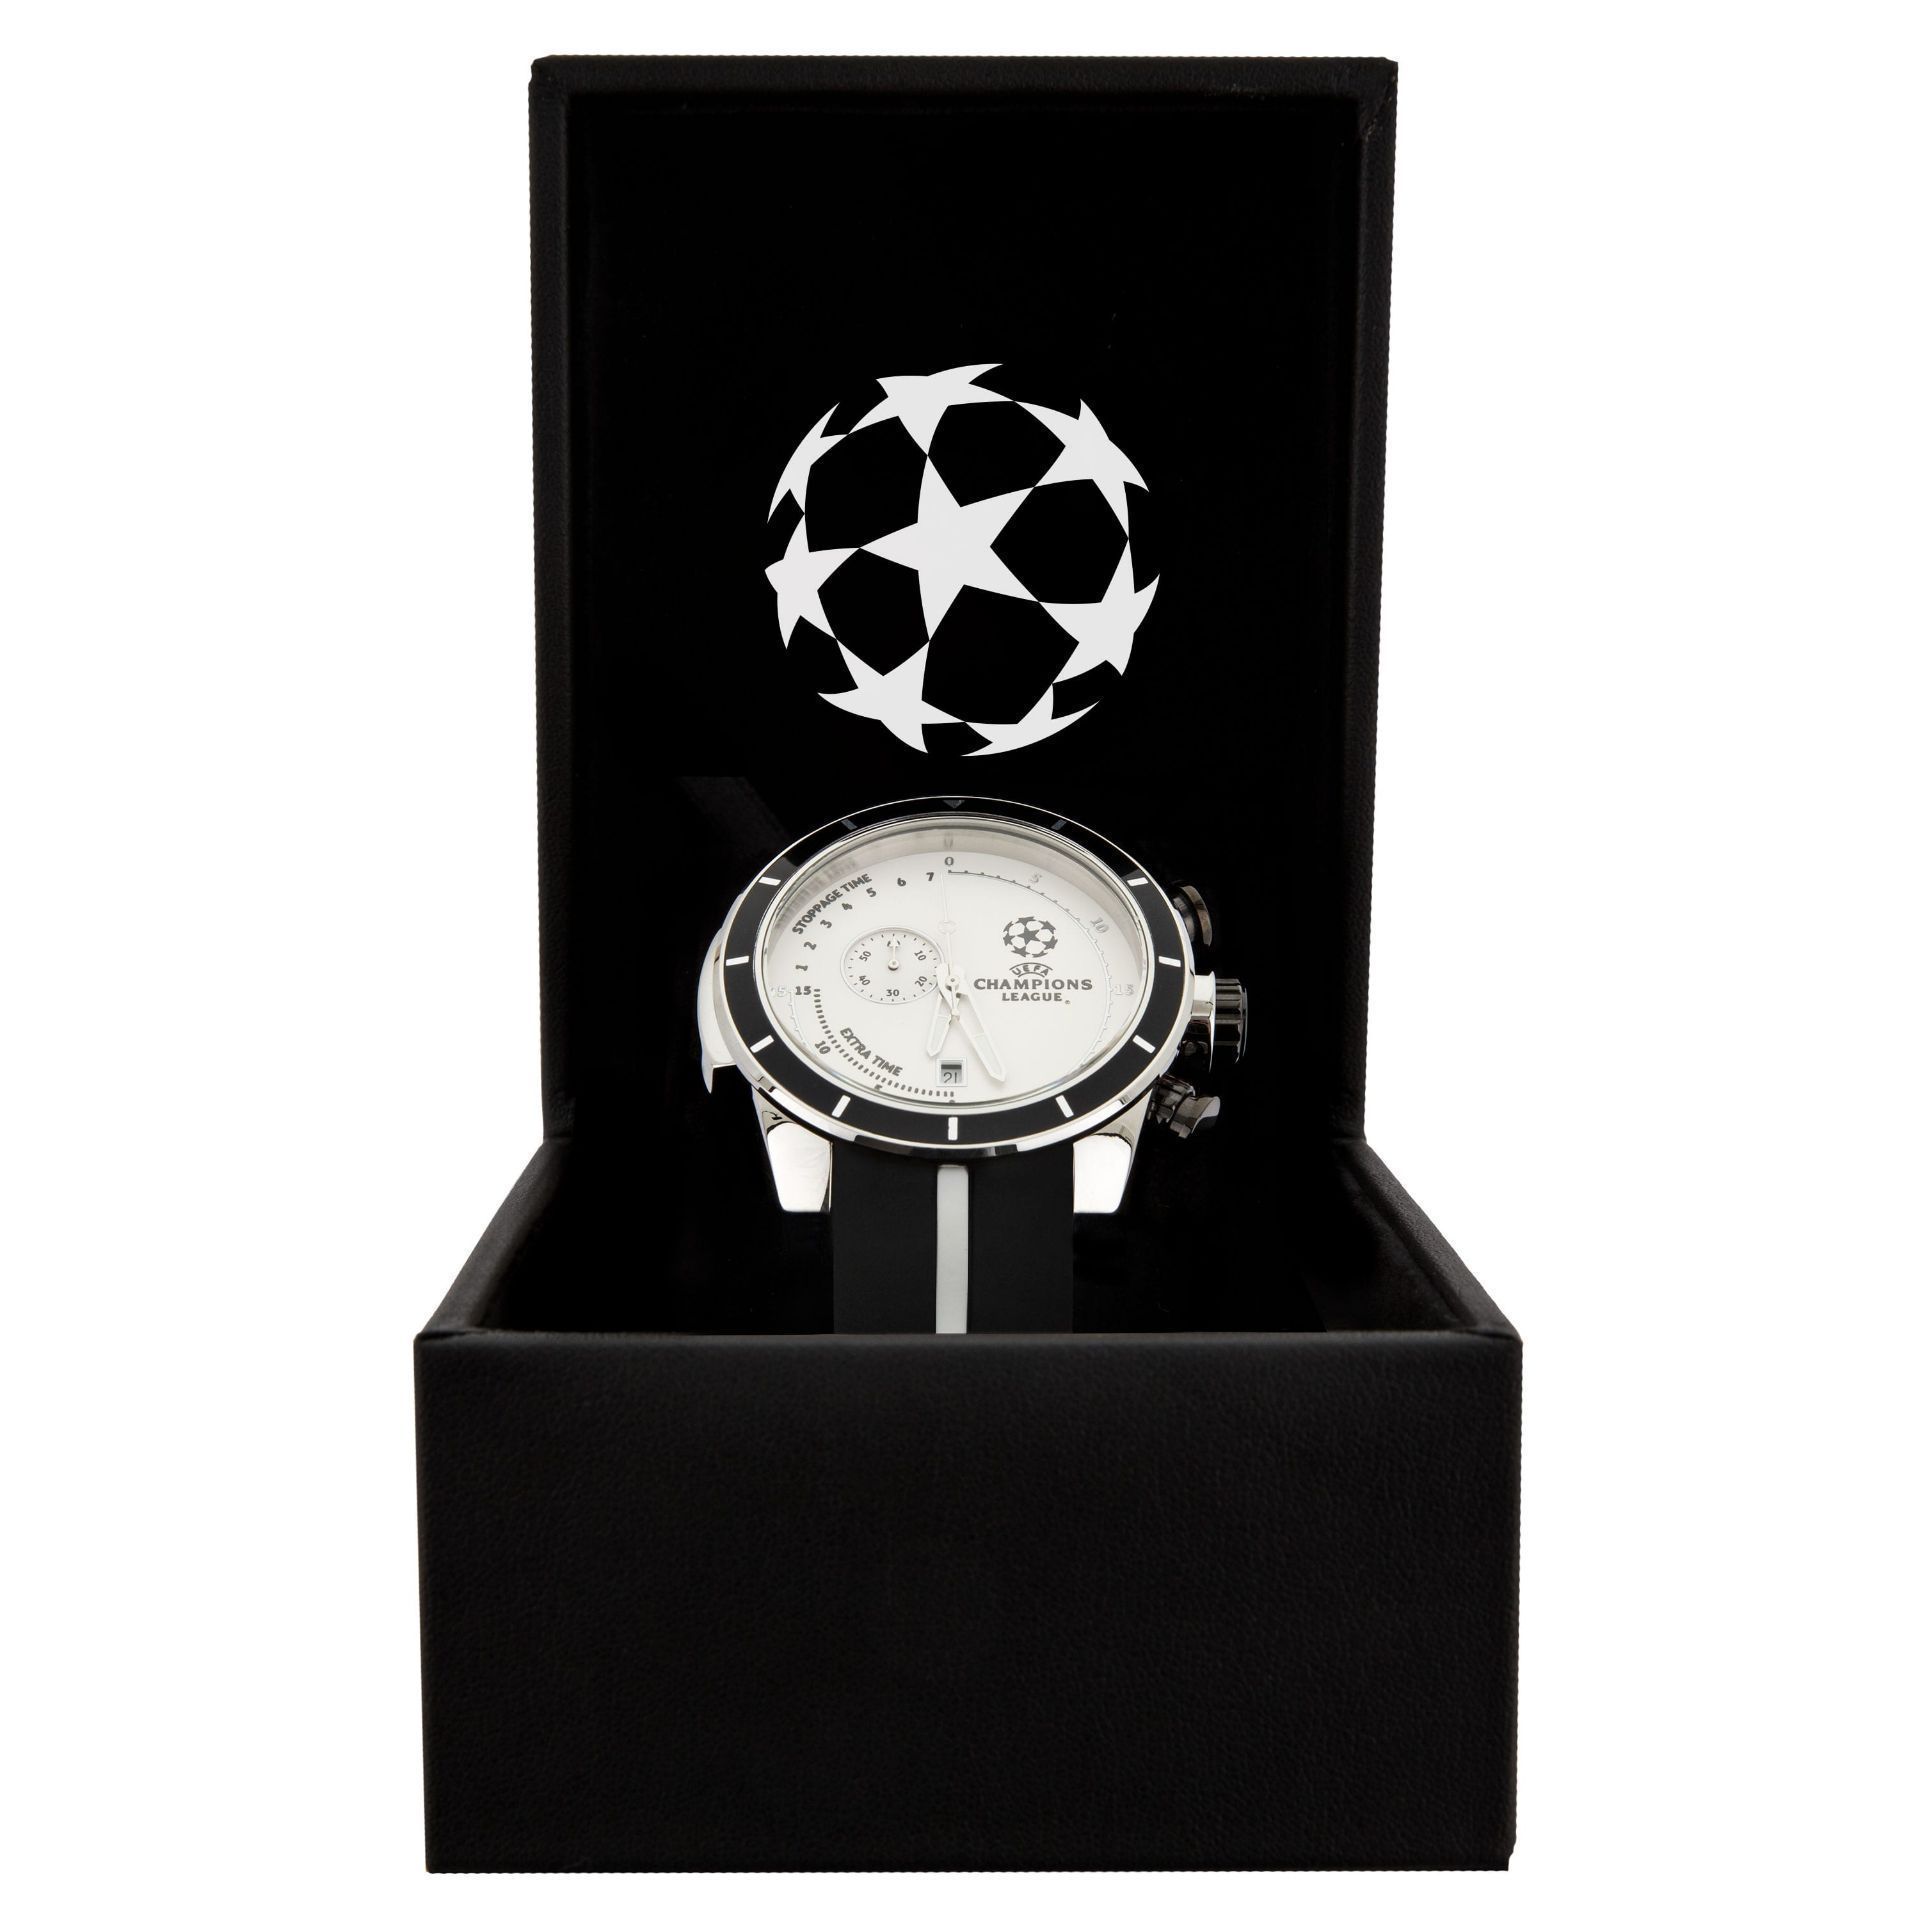 BULK LOT OF 29 x BRAND NEW OFFICIAL UEFA CHAMPIONS LEAGUE 45 MINUTES COUNTDOWN WATCH CL45-STB-BLGRP - Image 4 of 5